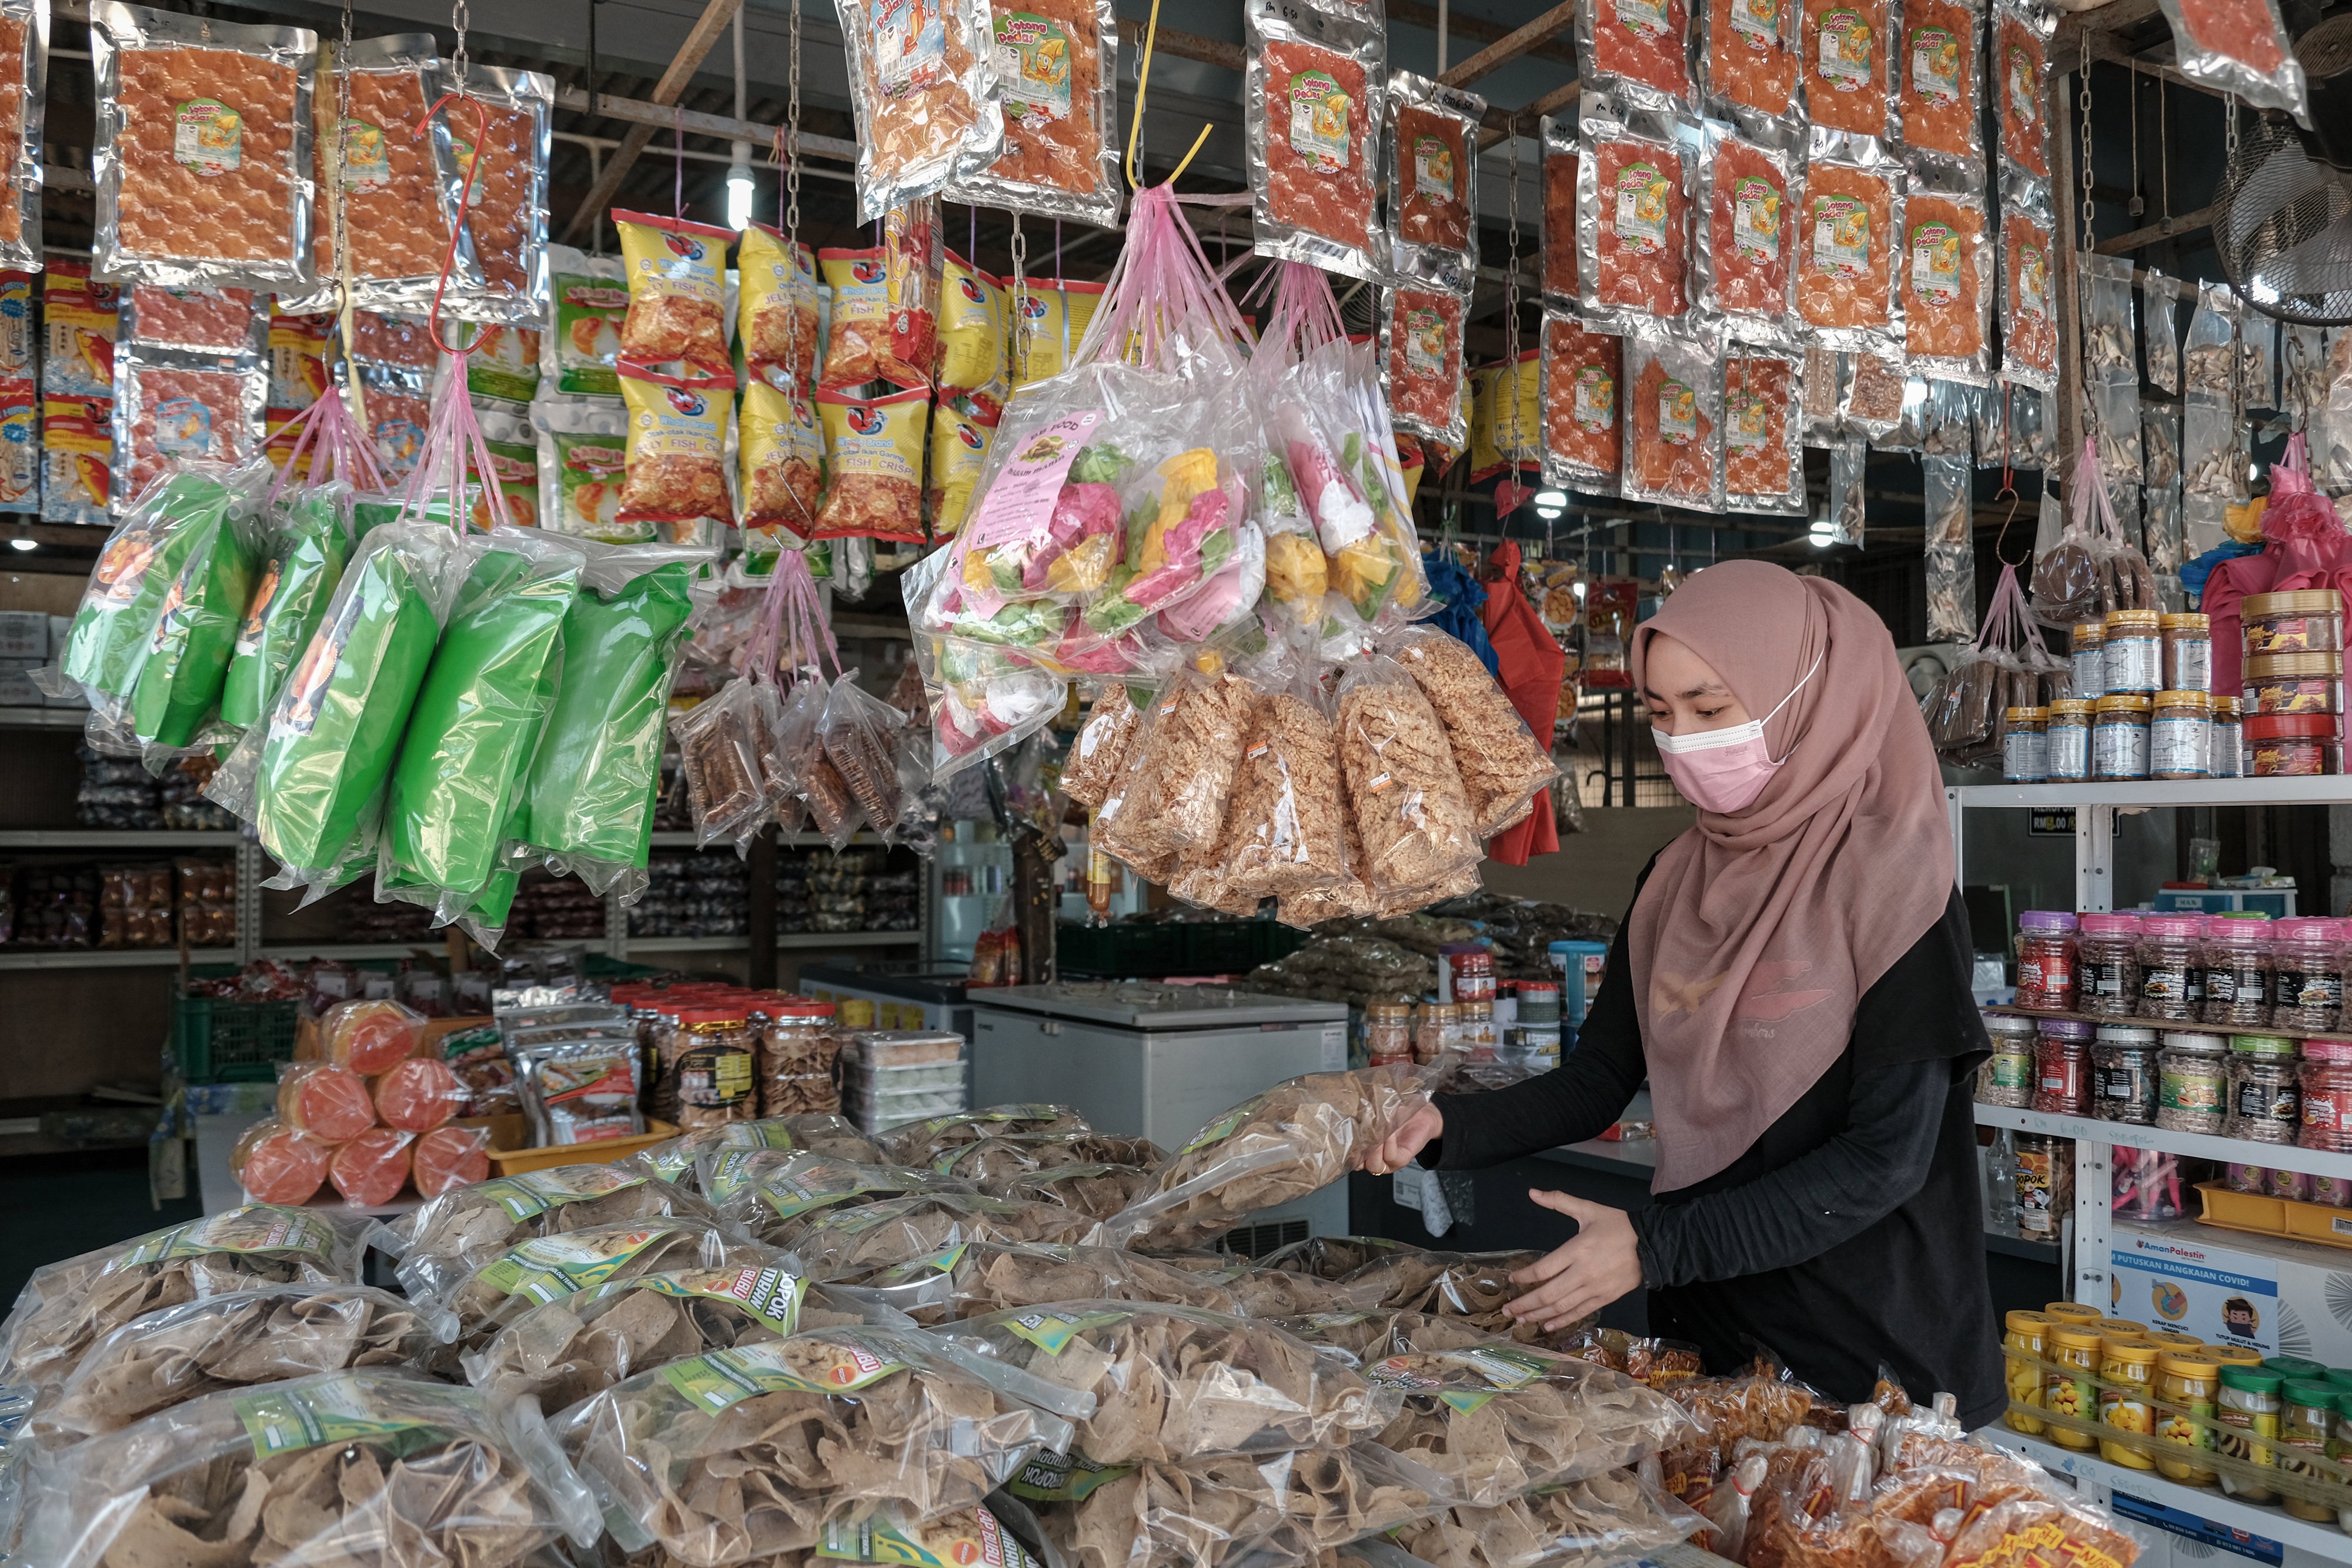 A worker arranges packaged fish crackers at a store in Terengganu. Ordinary Malaysians have been hit by the ringgit’s drop in value, as the cost of shopping surges with each depreciation. Photo: Bloomberg